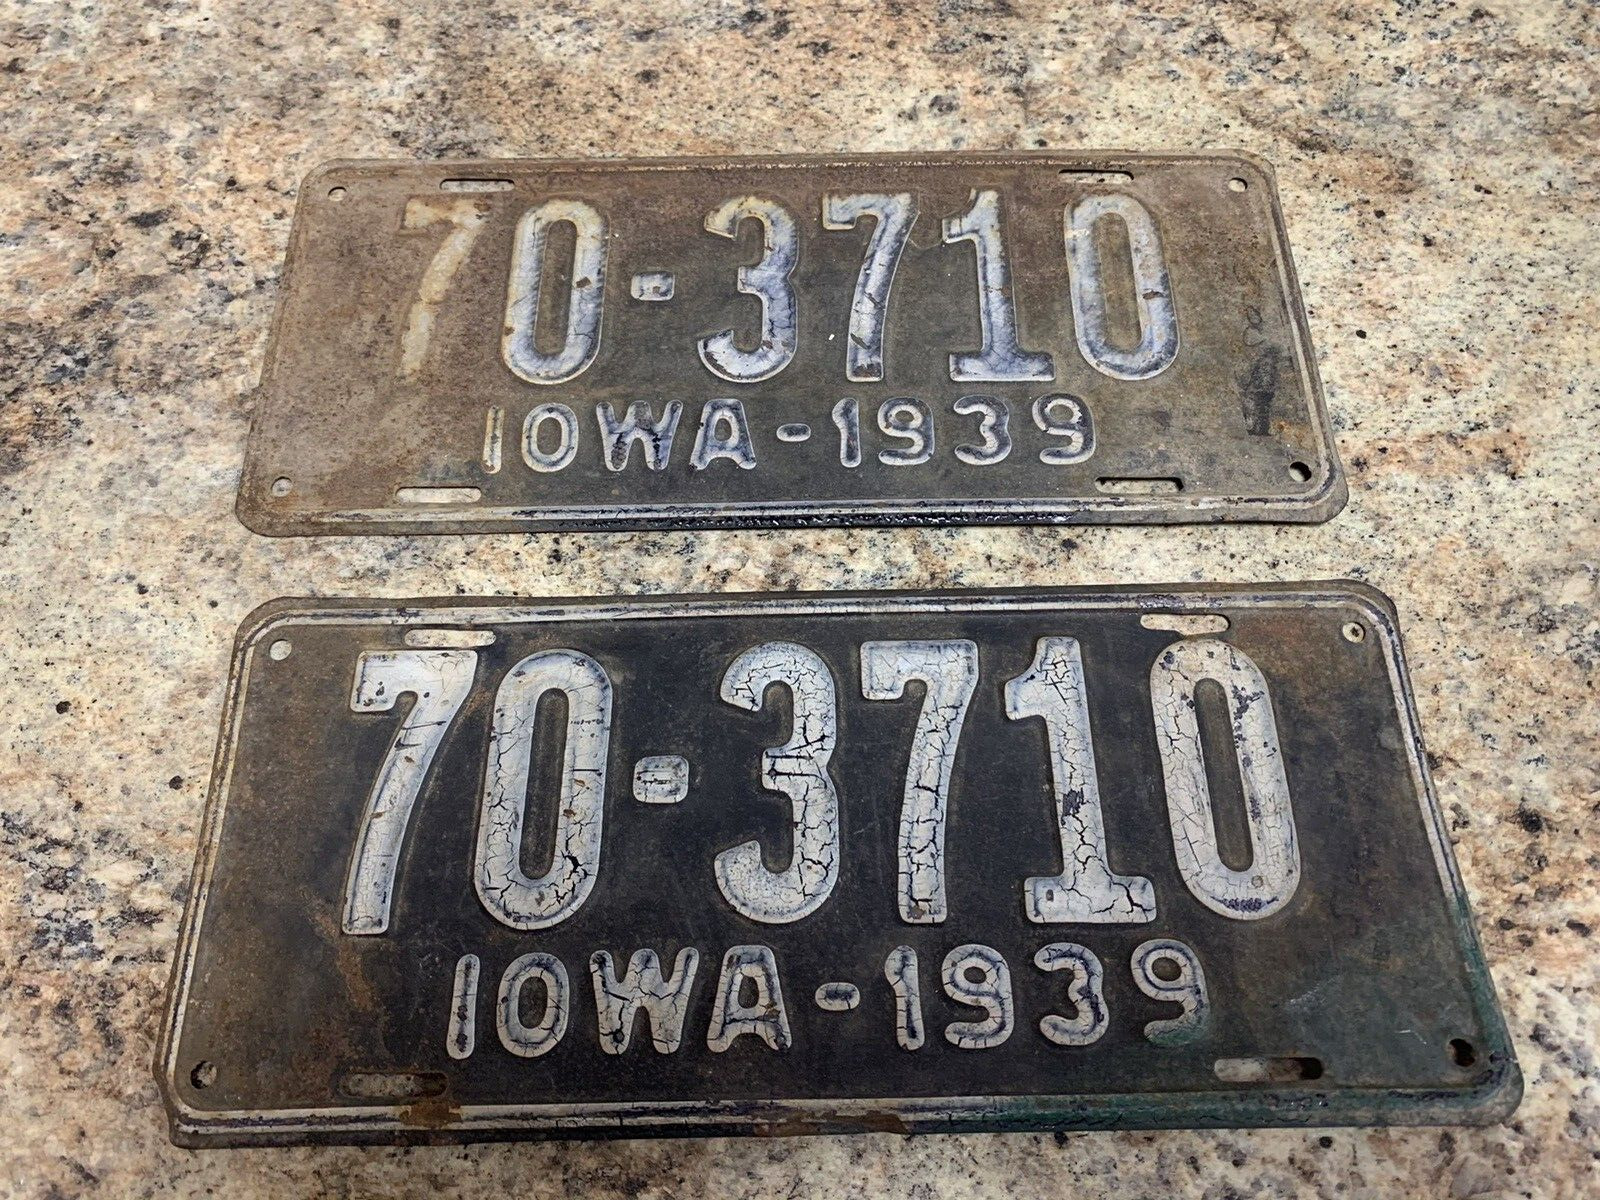 2x \Vintage License Plate Iowa 1933 Chevy Ford Truck 70-3710  (11D)